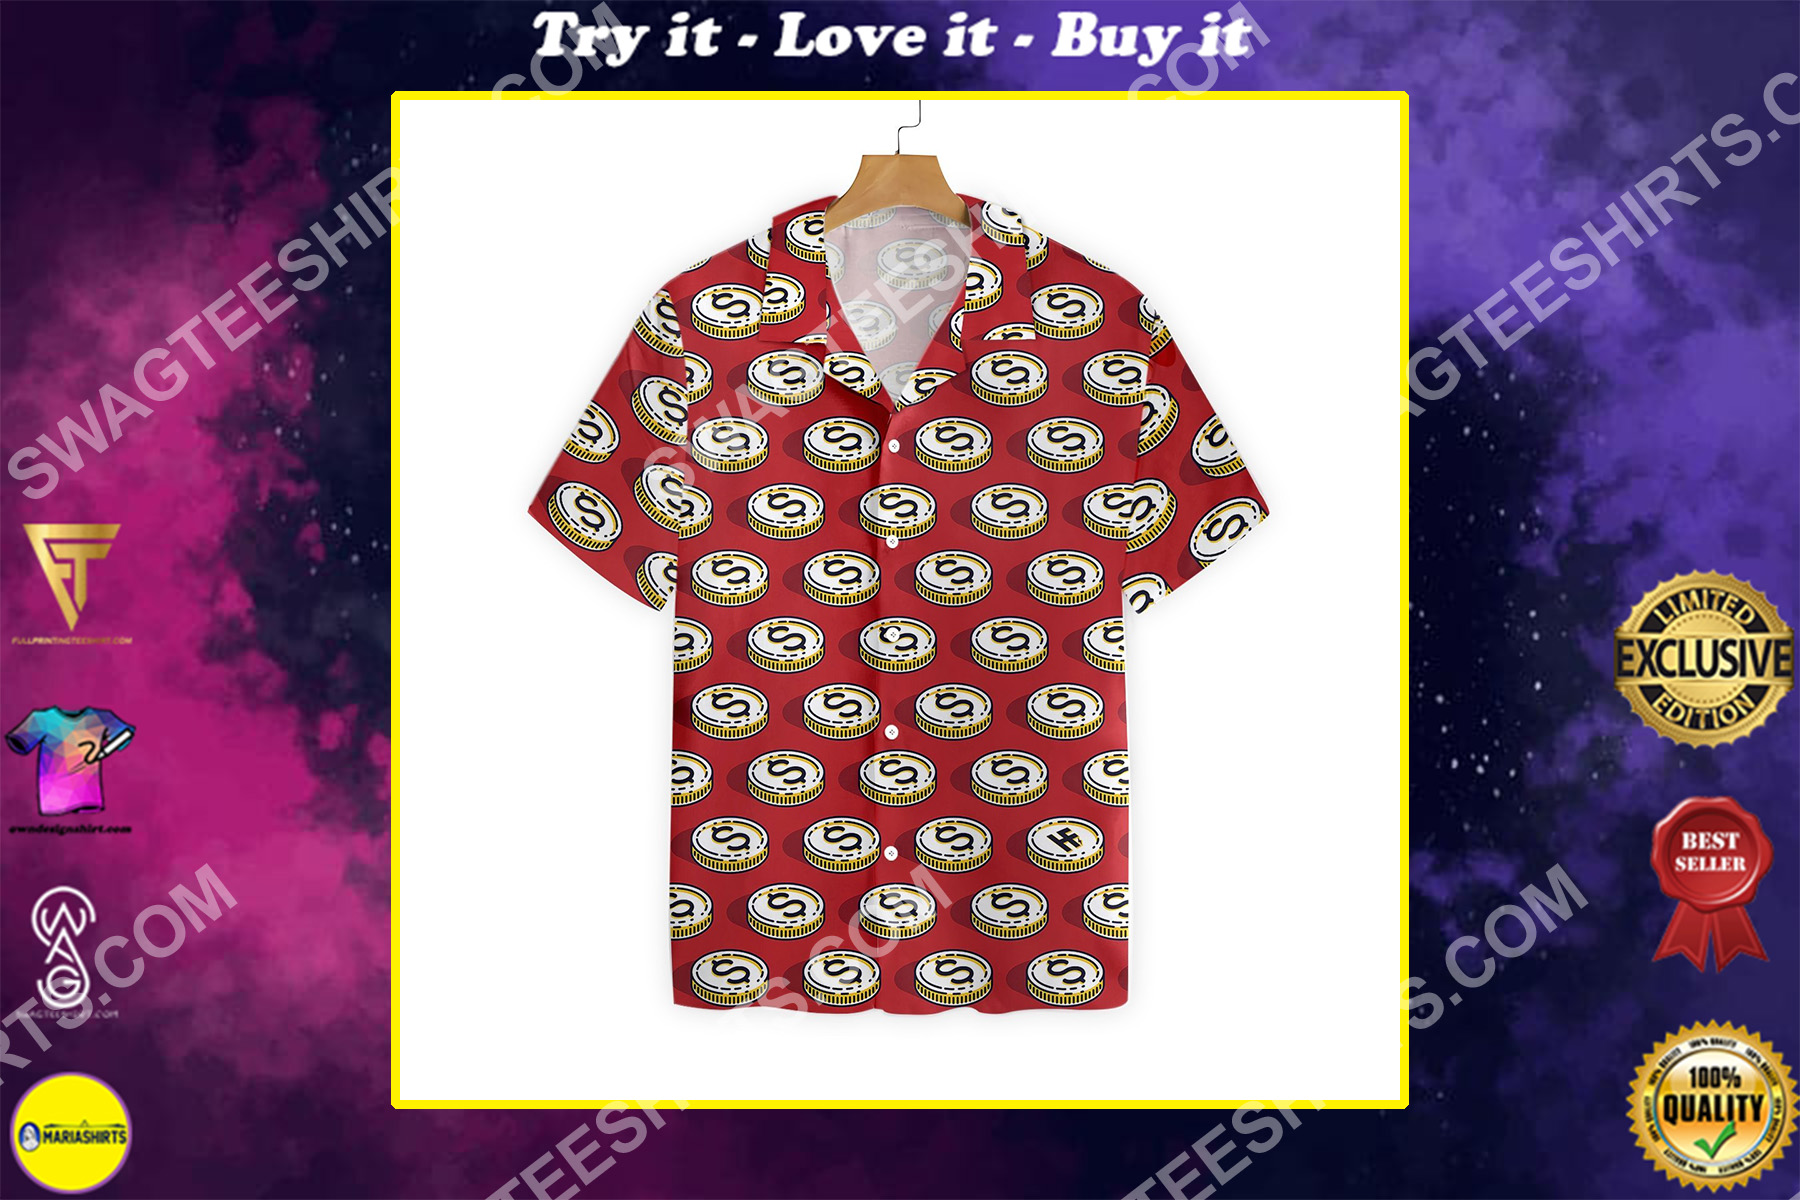 double or nothing casino all over printed hawaiian shirt